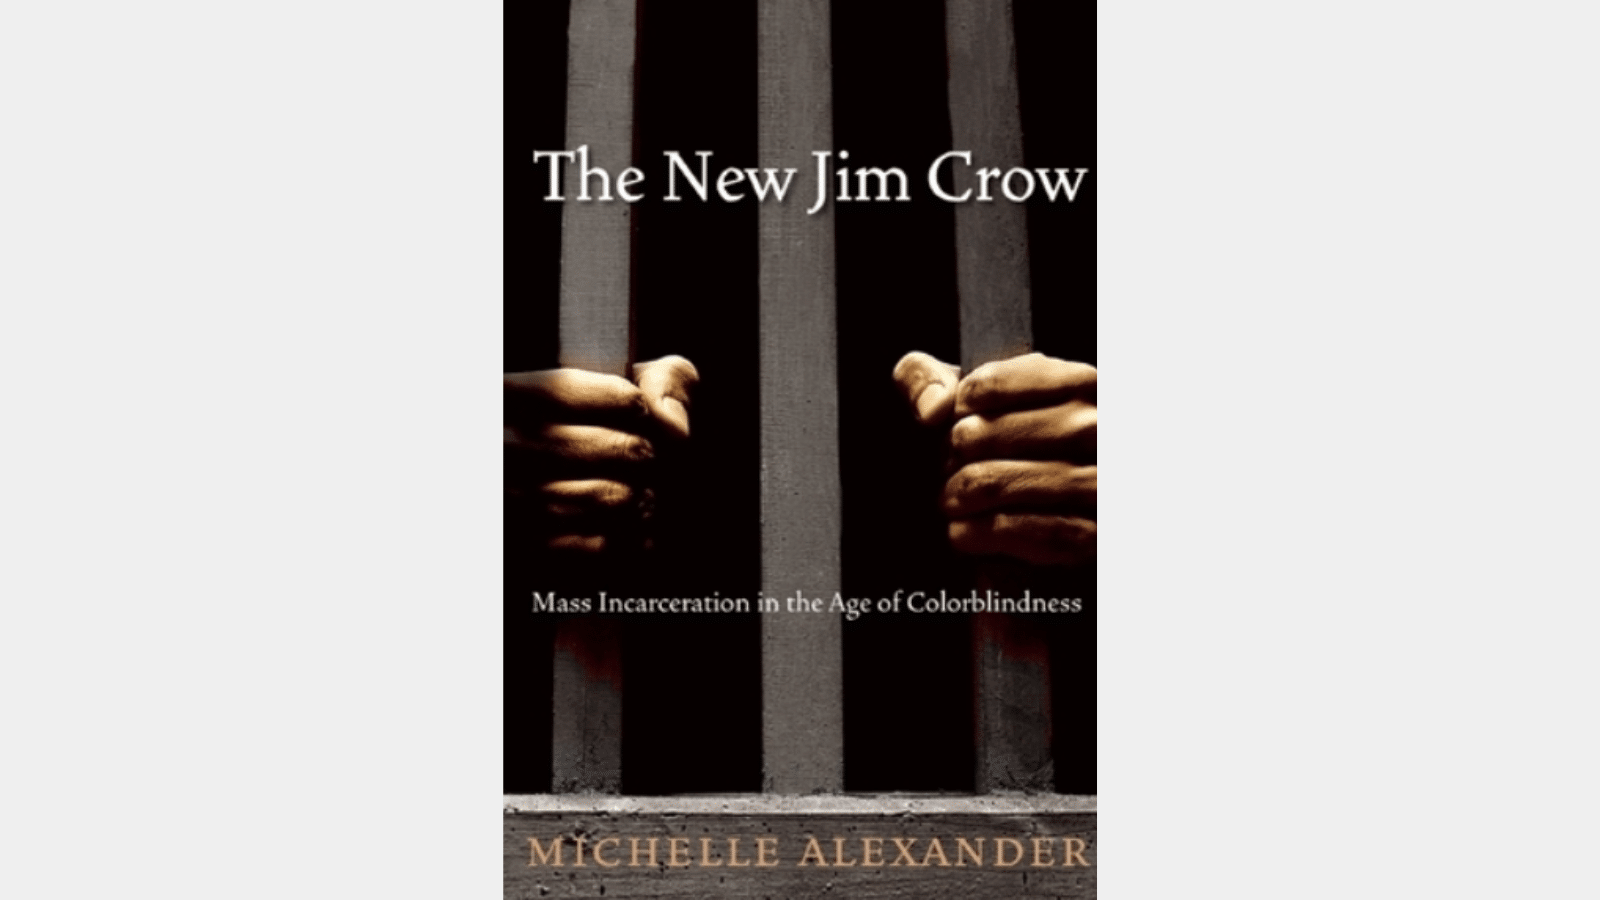 <p><span>This book transformed a reader’s understanding of how racism functions in the U.S. and their positionality as white. The reader came away from the book with a renewed perspective on social structure in both historic and current times. </span></p>